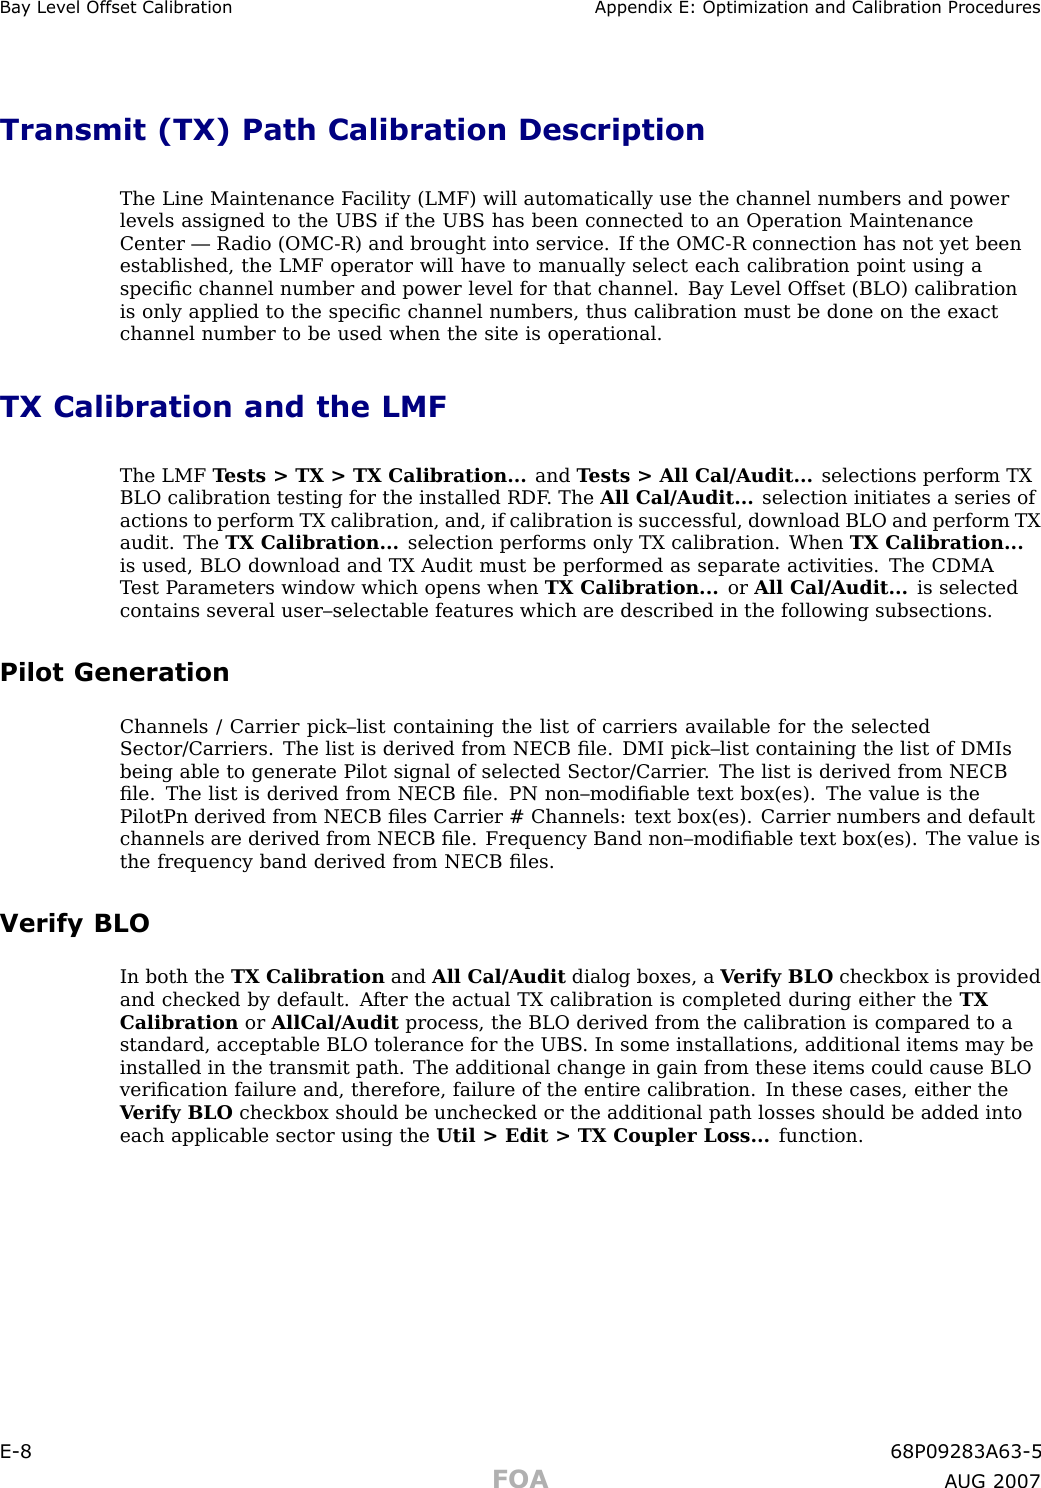 Ba y Lev el Offset Calibr ation Appendix E: Optimization and Calibr ation ProceduresTransmit (TX) Path Calibration DescriptionThe Line Maintenance F acility (LMF) will automatically use the channel numbers and powerlevels assigned to the UBS if the UBS has been connected to an Operation MaintenanceCenter — R adio (OMC -R) and brought into service. If the OMC -R connection has not yet beenestablished, the LMF operator will have to manually select each calibration point using aspeciﬁc channel number and power level for that channel. Bay Level Offset (BLO) calibrationis only applied to the speciﬁc channel numbers, thus calibration must be done on the exactchannel number to be used when the site is operational.TX Calibration and the LMFThe LMF T ests &gt; TX &gt; TX Calibration... and T ests &gt; All Cal/Audit... selections perform TXBLO calibration testing for the installed RDF . The All Cal/Audit... selection initiates a series ofactions to perform TX calibration, and, if calibration is successful, download BLO and perform TXaudit. The TX Calibration... selection performs only TX calibration. When TX Calibration...is used, BLO download and TX Audit must be performed as separate activities. The CDMAT est P arameters window which opens when TX Calibration... or All Cal/Audit... is selectedcontains several user–selectable features which are described in the following subsections.Pilot GenerationChannels / Carrier pick–list containing the list of carriers available for the selectedSector/Carriers. The list is derived from NECB ﬁle. DMI pick–list containing the list of DMIsbeing able to generate Pilot signal of selected Sector/Carrier . The list is derived from NECBﬁle. The list is derived from NECB ﬁle. PN non–modiﬁable text box(es). The value is thePilotPn derived from NECB ﬁles Carrier # Channels: text box(es). Carrier numbers and defaultchannels are derived from NECB ﬁle. Frequency Band non–modiﬁable text box(es). The value isthe frequency band derived from NECB ﬁles.Verify BLOIn both the TX Calibration and All Cal/Audit dialog boxes, a V erify BLO checkbox is providedand checked by default. A fter the actual TX calibration is completed during either the TXCalibration or AllCal/Audit process, the BLO derived from the calibration is compared to astandard, acceptable BLO tolerance for the UBS . In some installations, additional items may beinstalled in the transmit path. The additional change in gain from these items could cause BLOveriﬁcation failure and, therefore, failure of the entire calibration. In these cases, either theV erify BLO checkbox should be unchecked or the additional path losses should be added intoeach applicable sector using the Util &gt; Edit &gt; TX Coupler Loss... function.E -8 68P09283A63 -5FOA A UG 2007